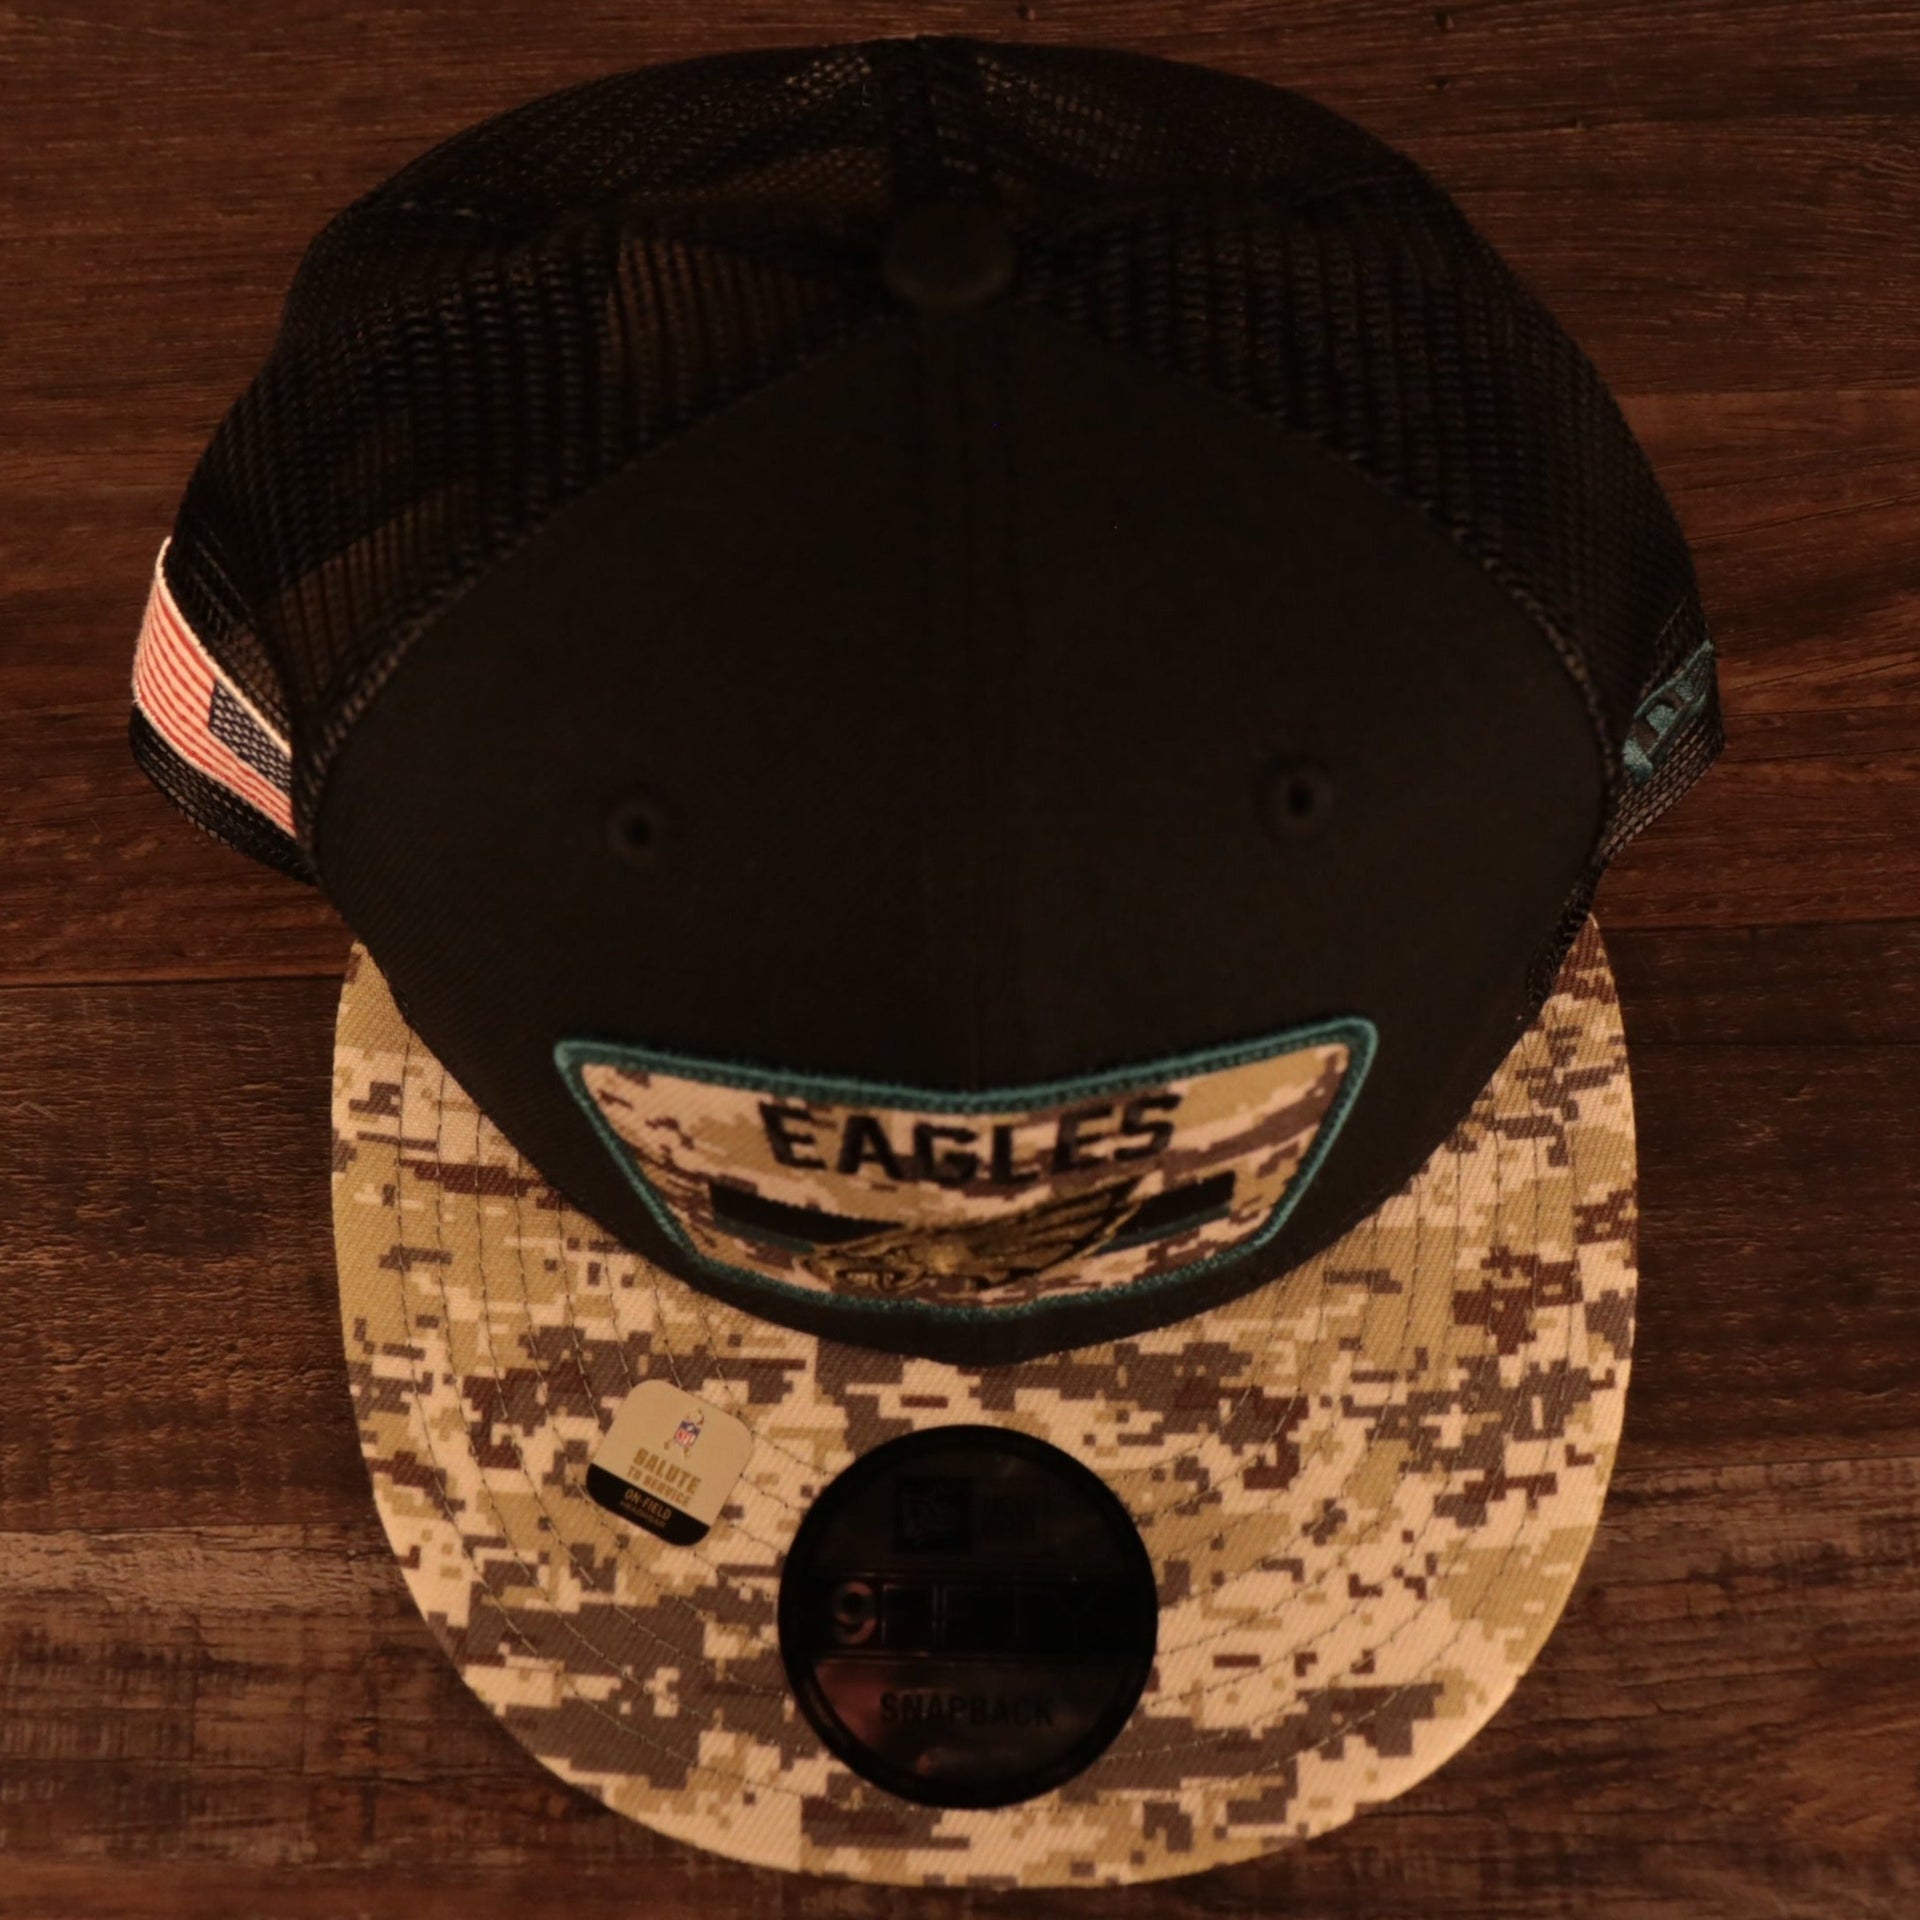 Top down view of the Philadelphia Eagles 2021 Salute To Service On Field Sideline 9Fifty Snapback Trucker Hat